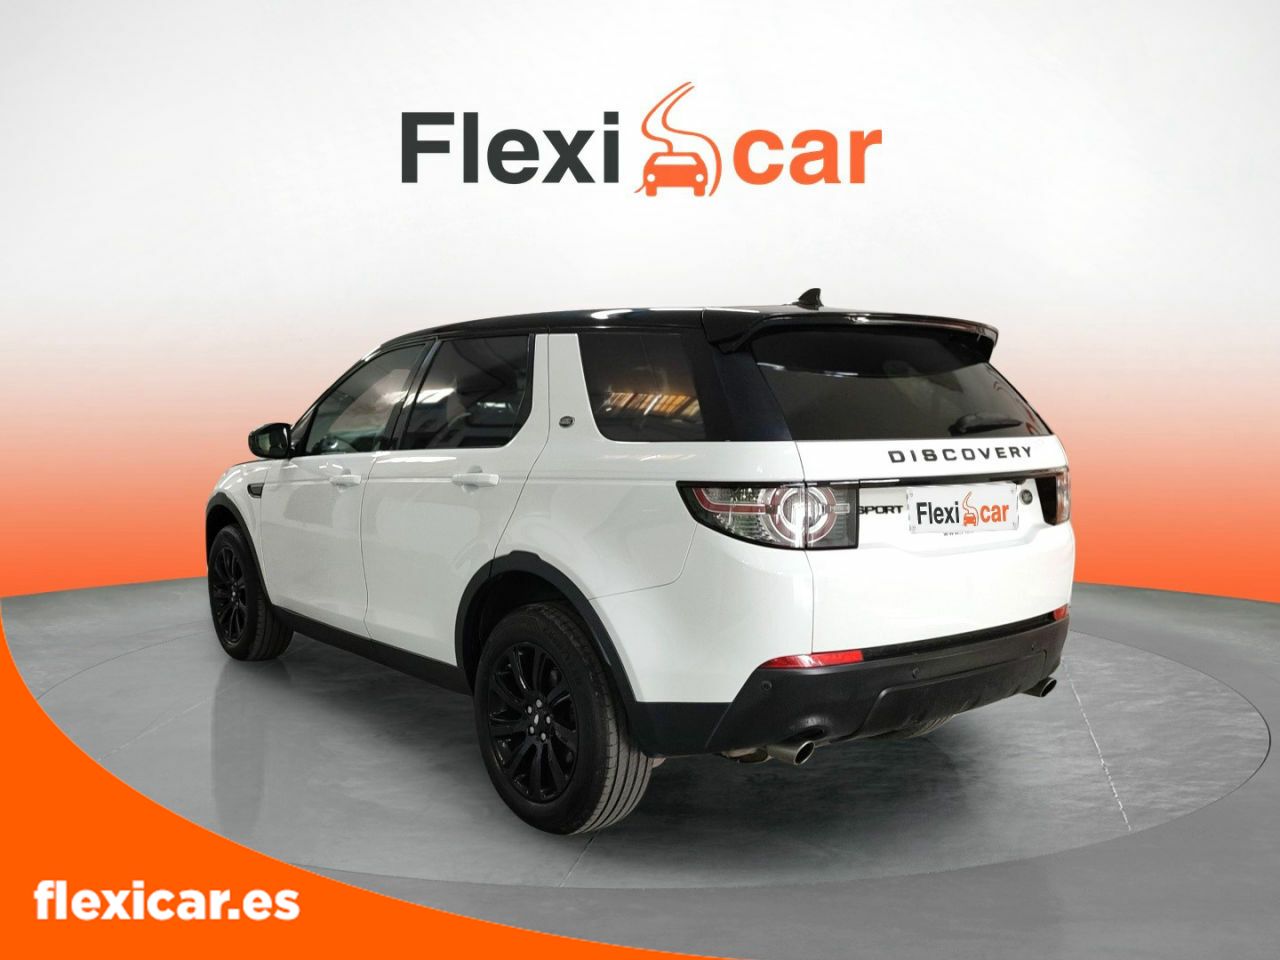 Foto Land-Rover Discovery 4